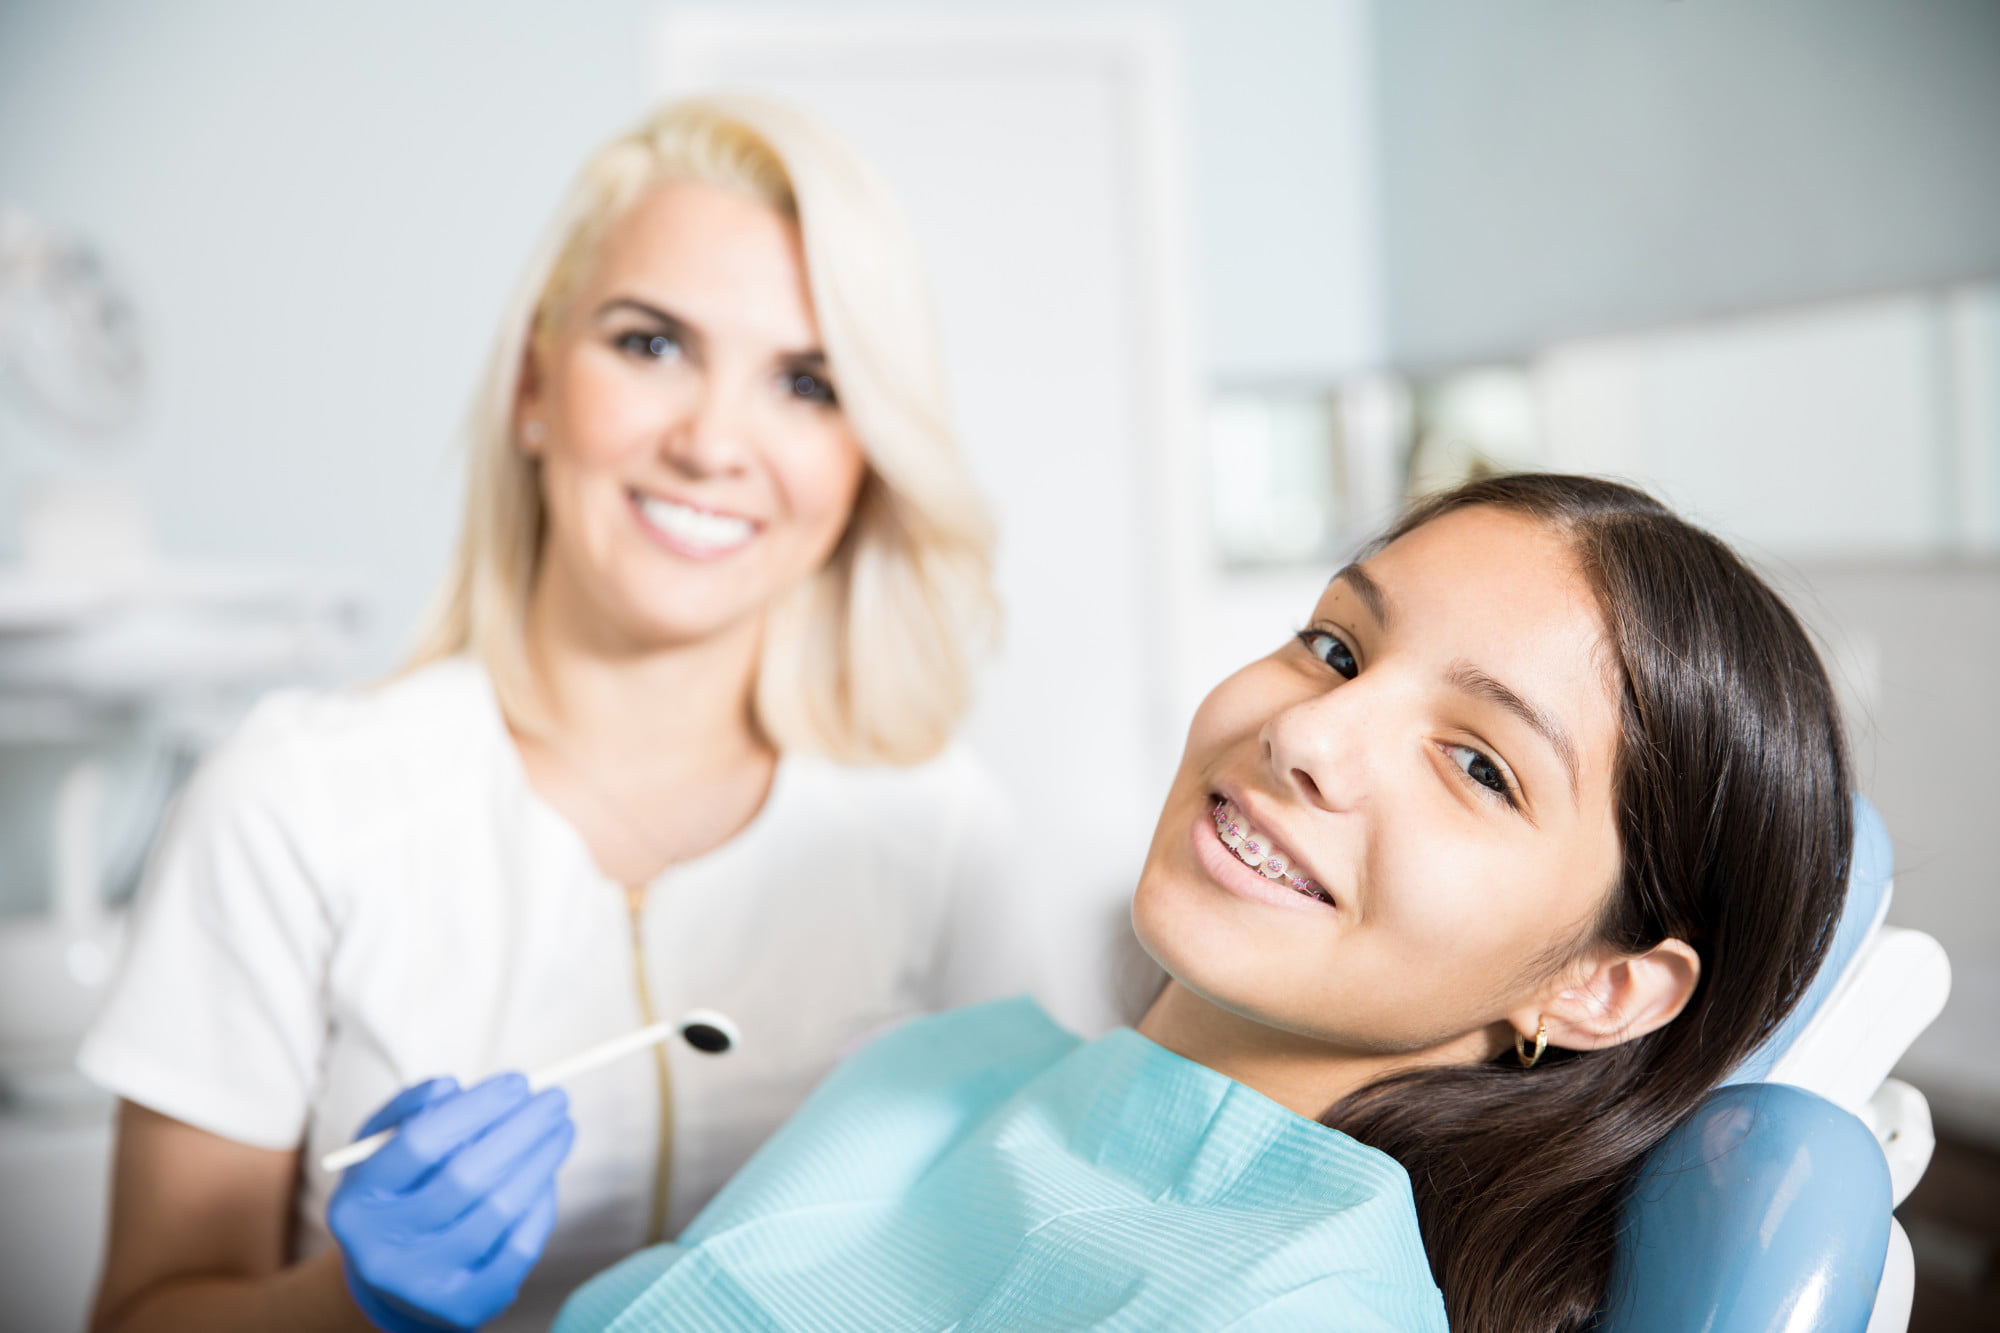 Best orthodontists near me: Do you want to know about the top questions to ask an orthodontist in advance? Read on to learn more.